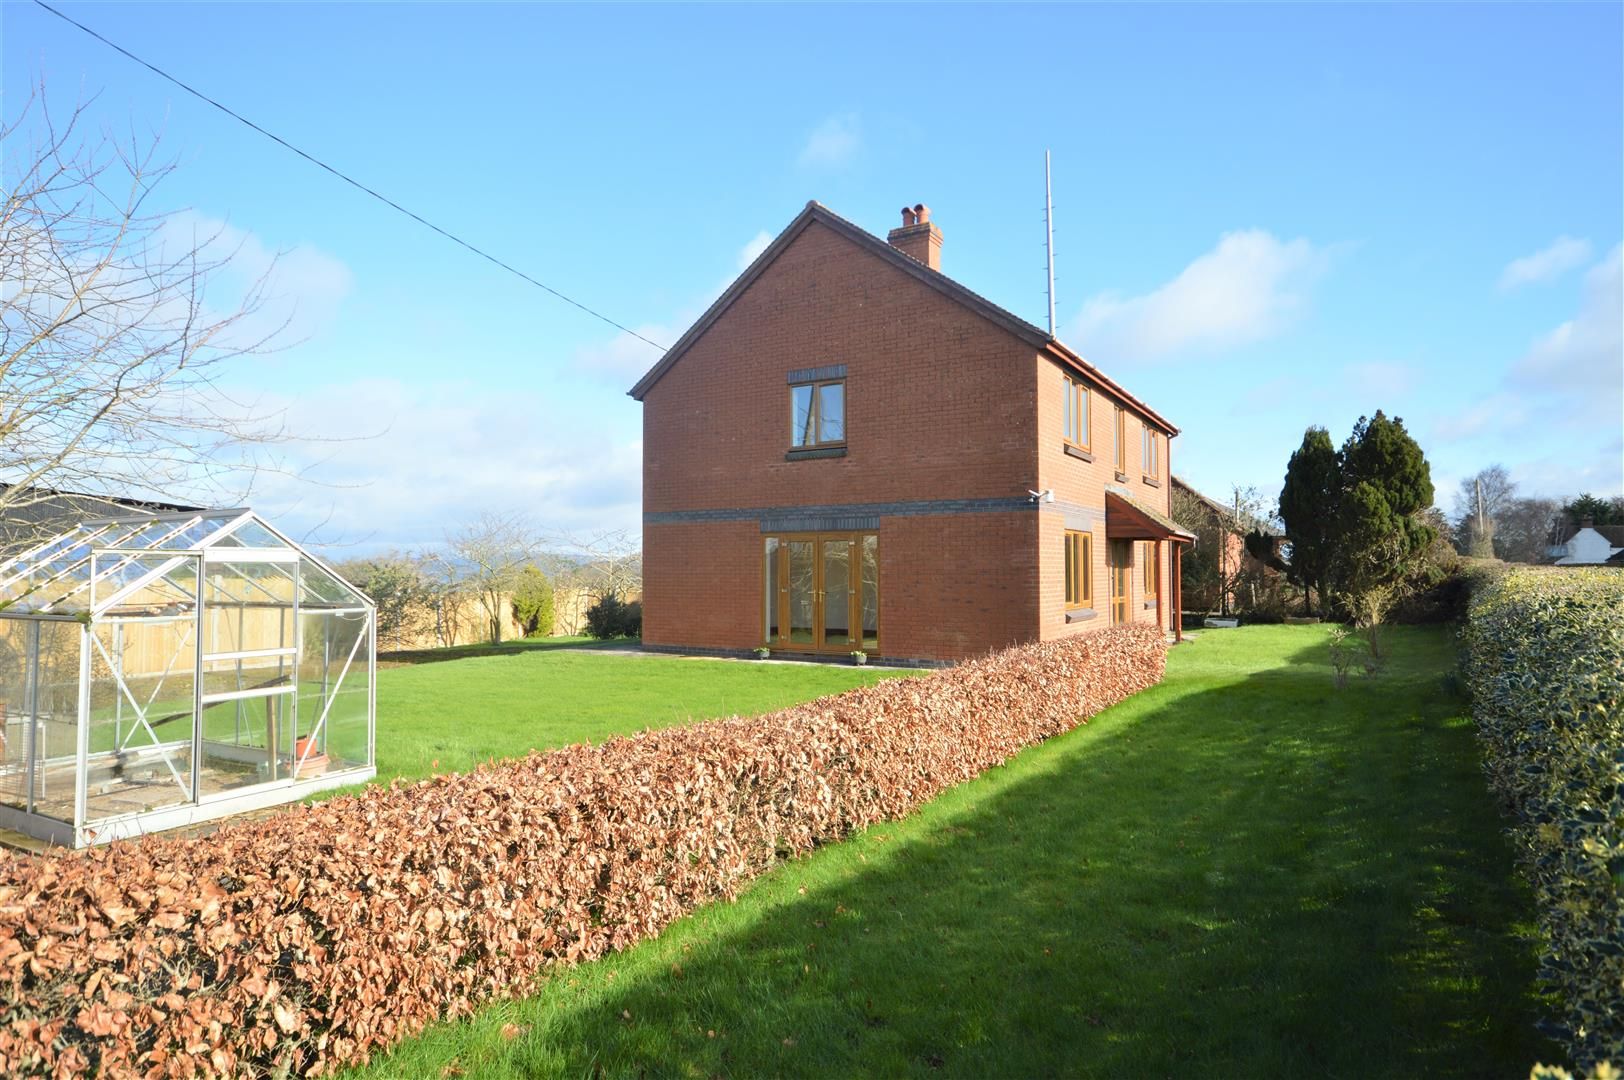 4 bed detached for sale in Leysters, HR6